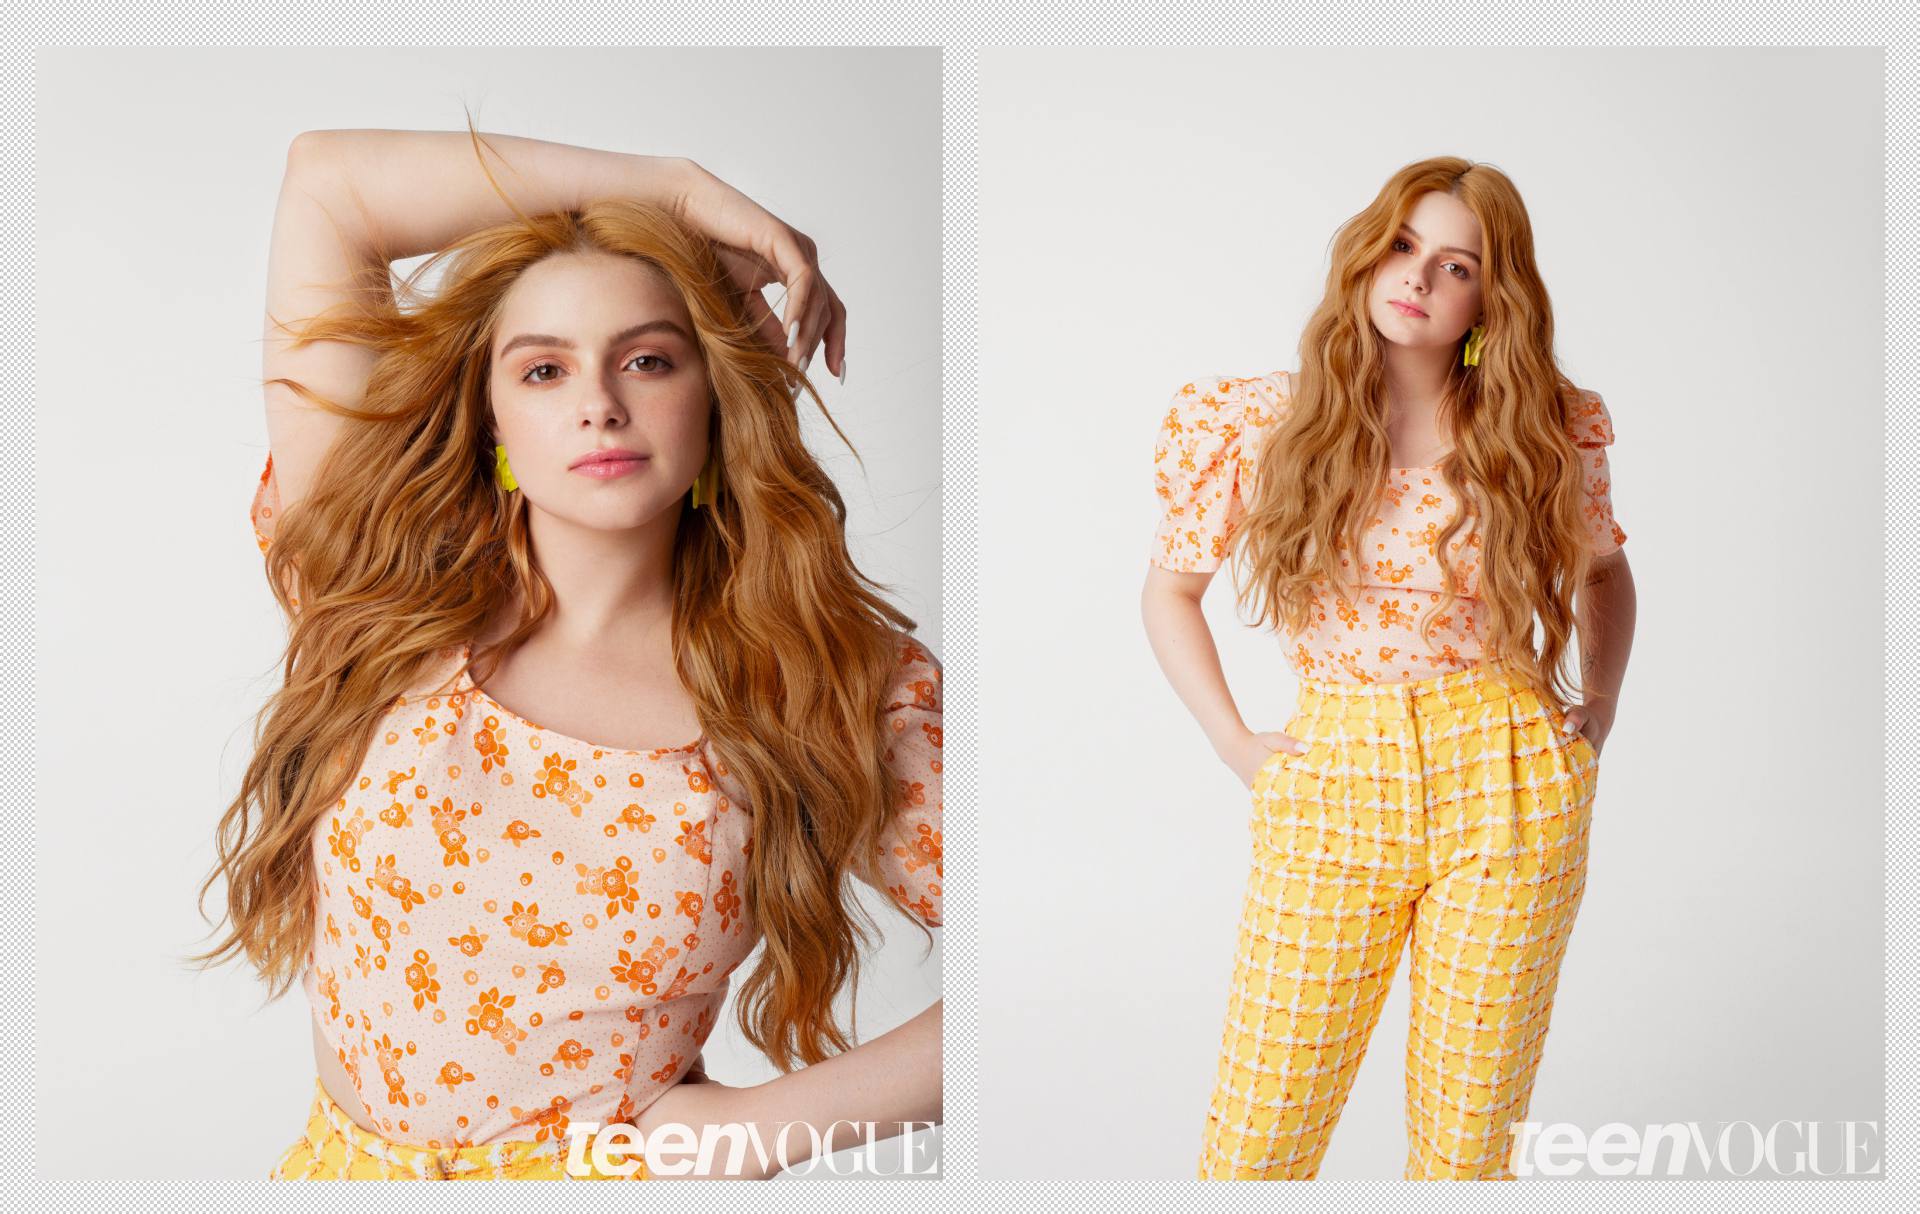 Ariel Winter Beautiful As Redhead In Photoshoot For Teen Vogue Magazine 0006